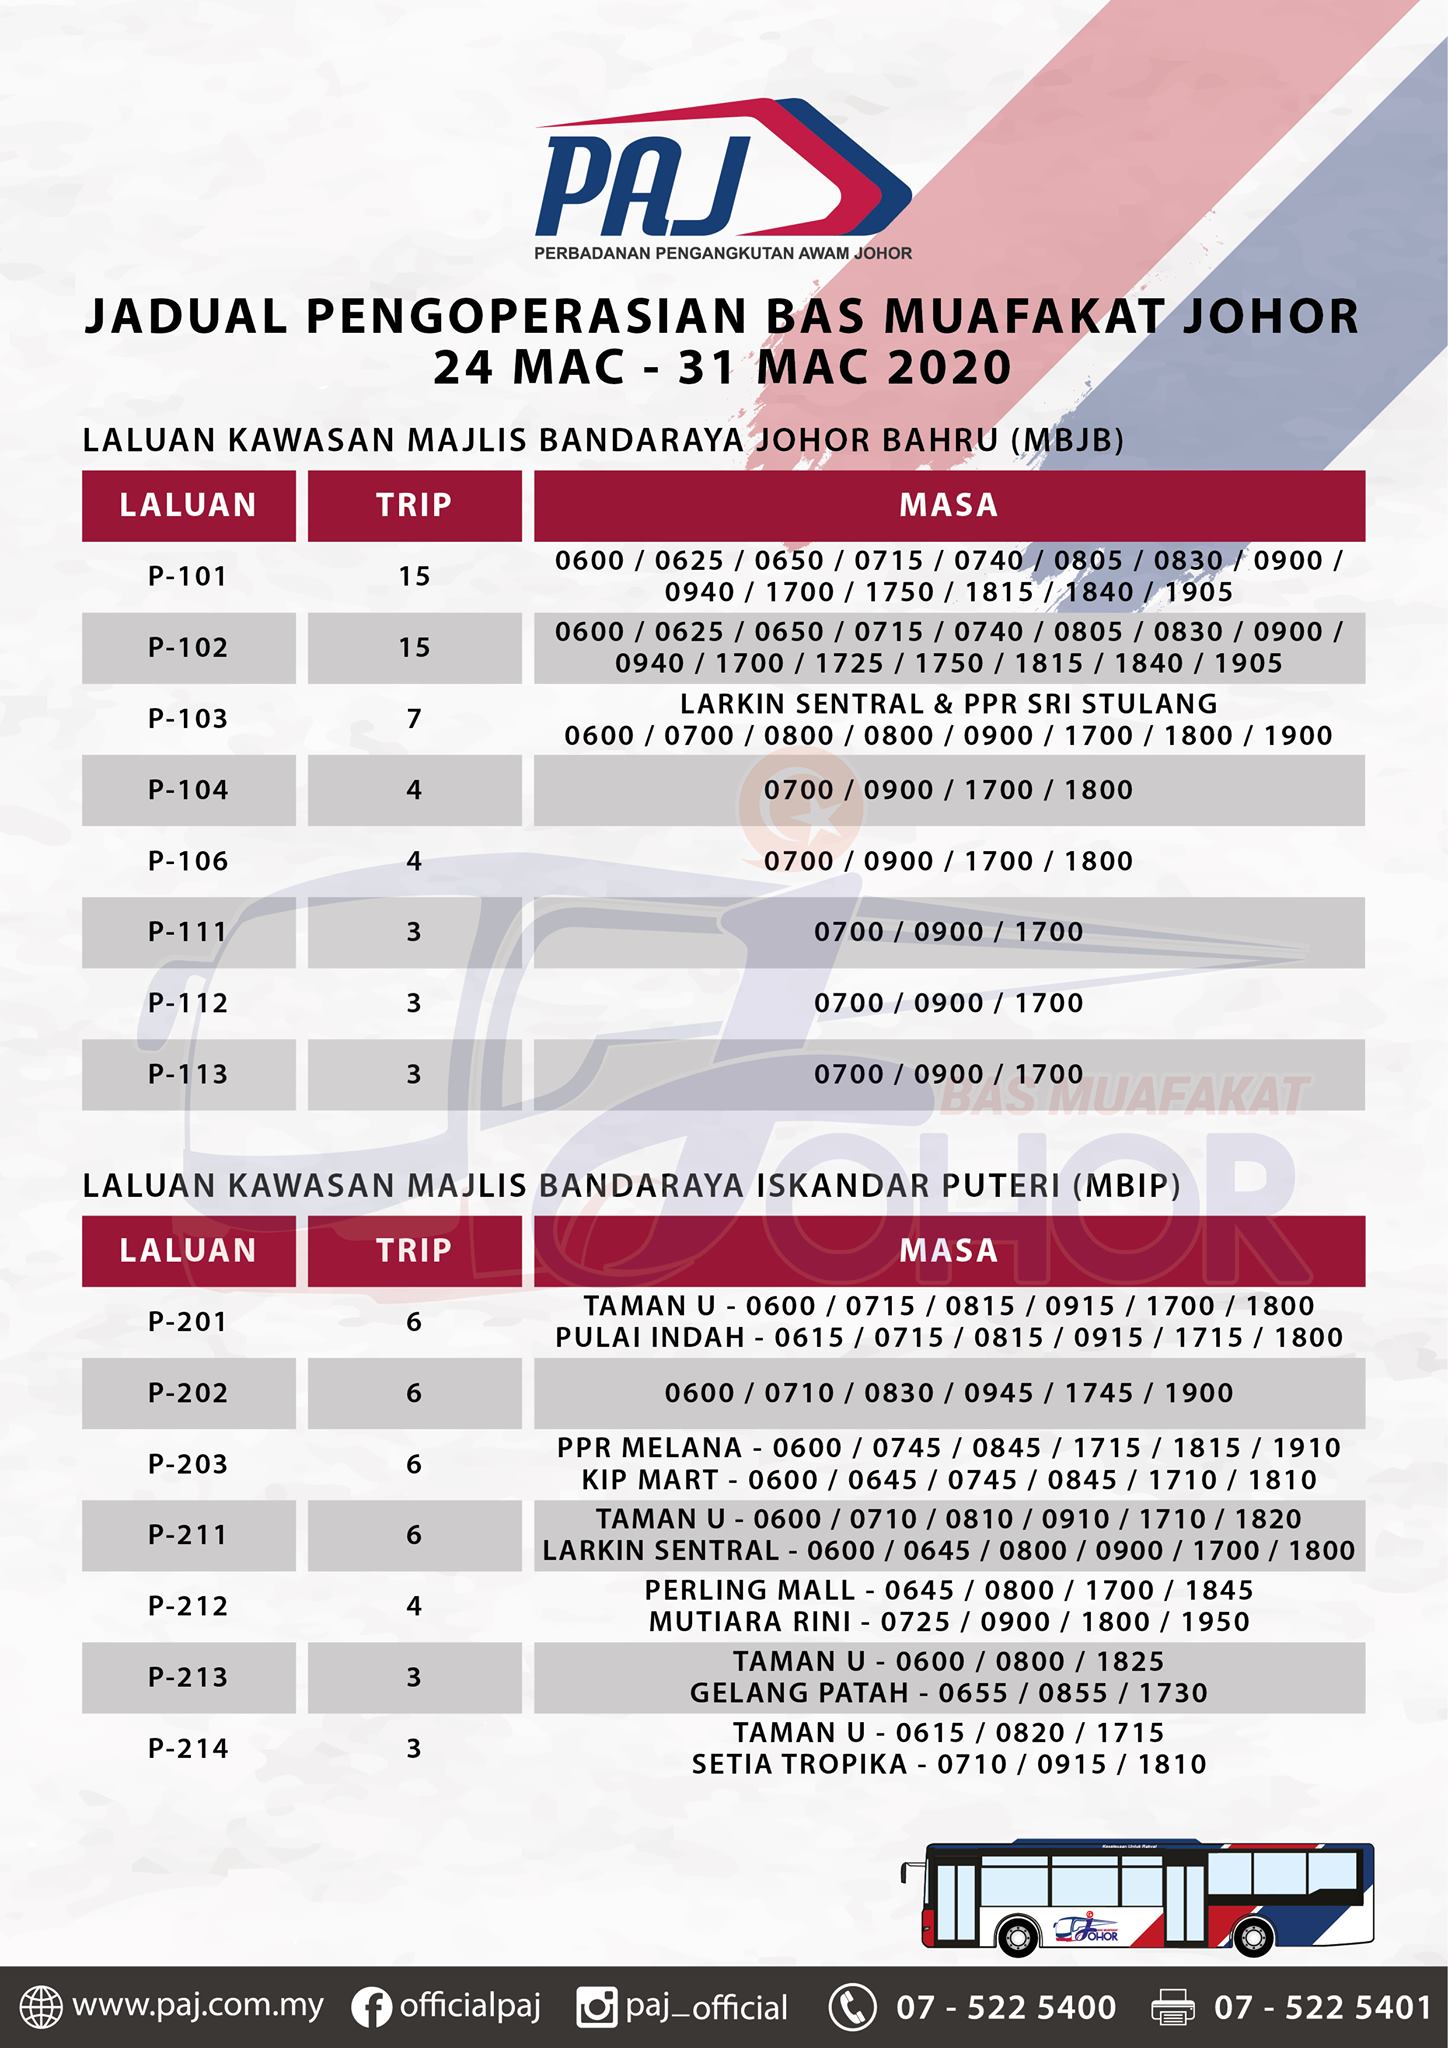 Official PAJ poster on the change in operation hours of Bas Muafakat Johor bus services in Johor Bahru and Iskandar Puteri districts